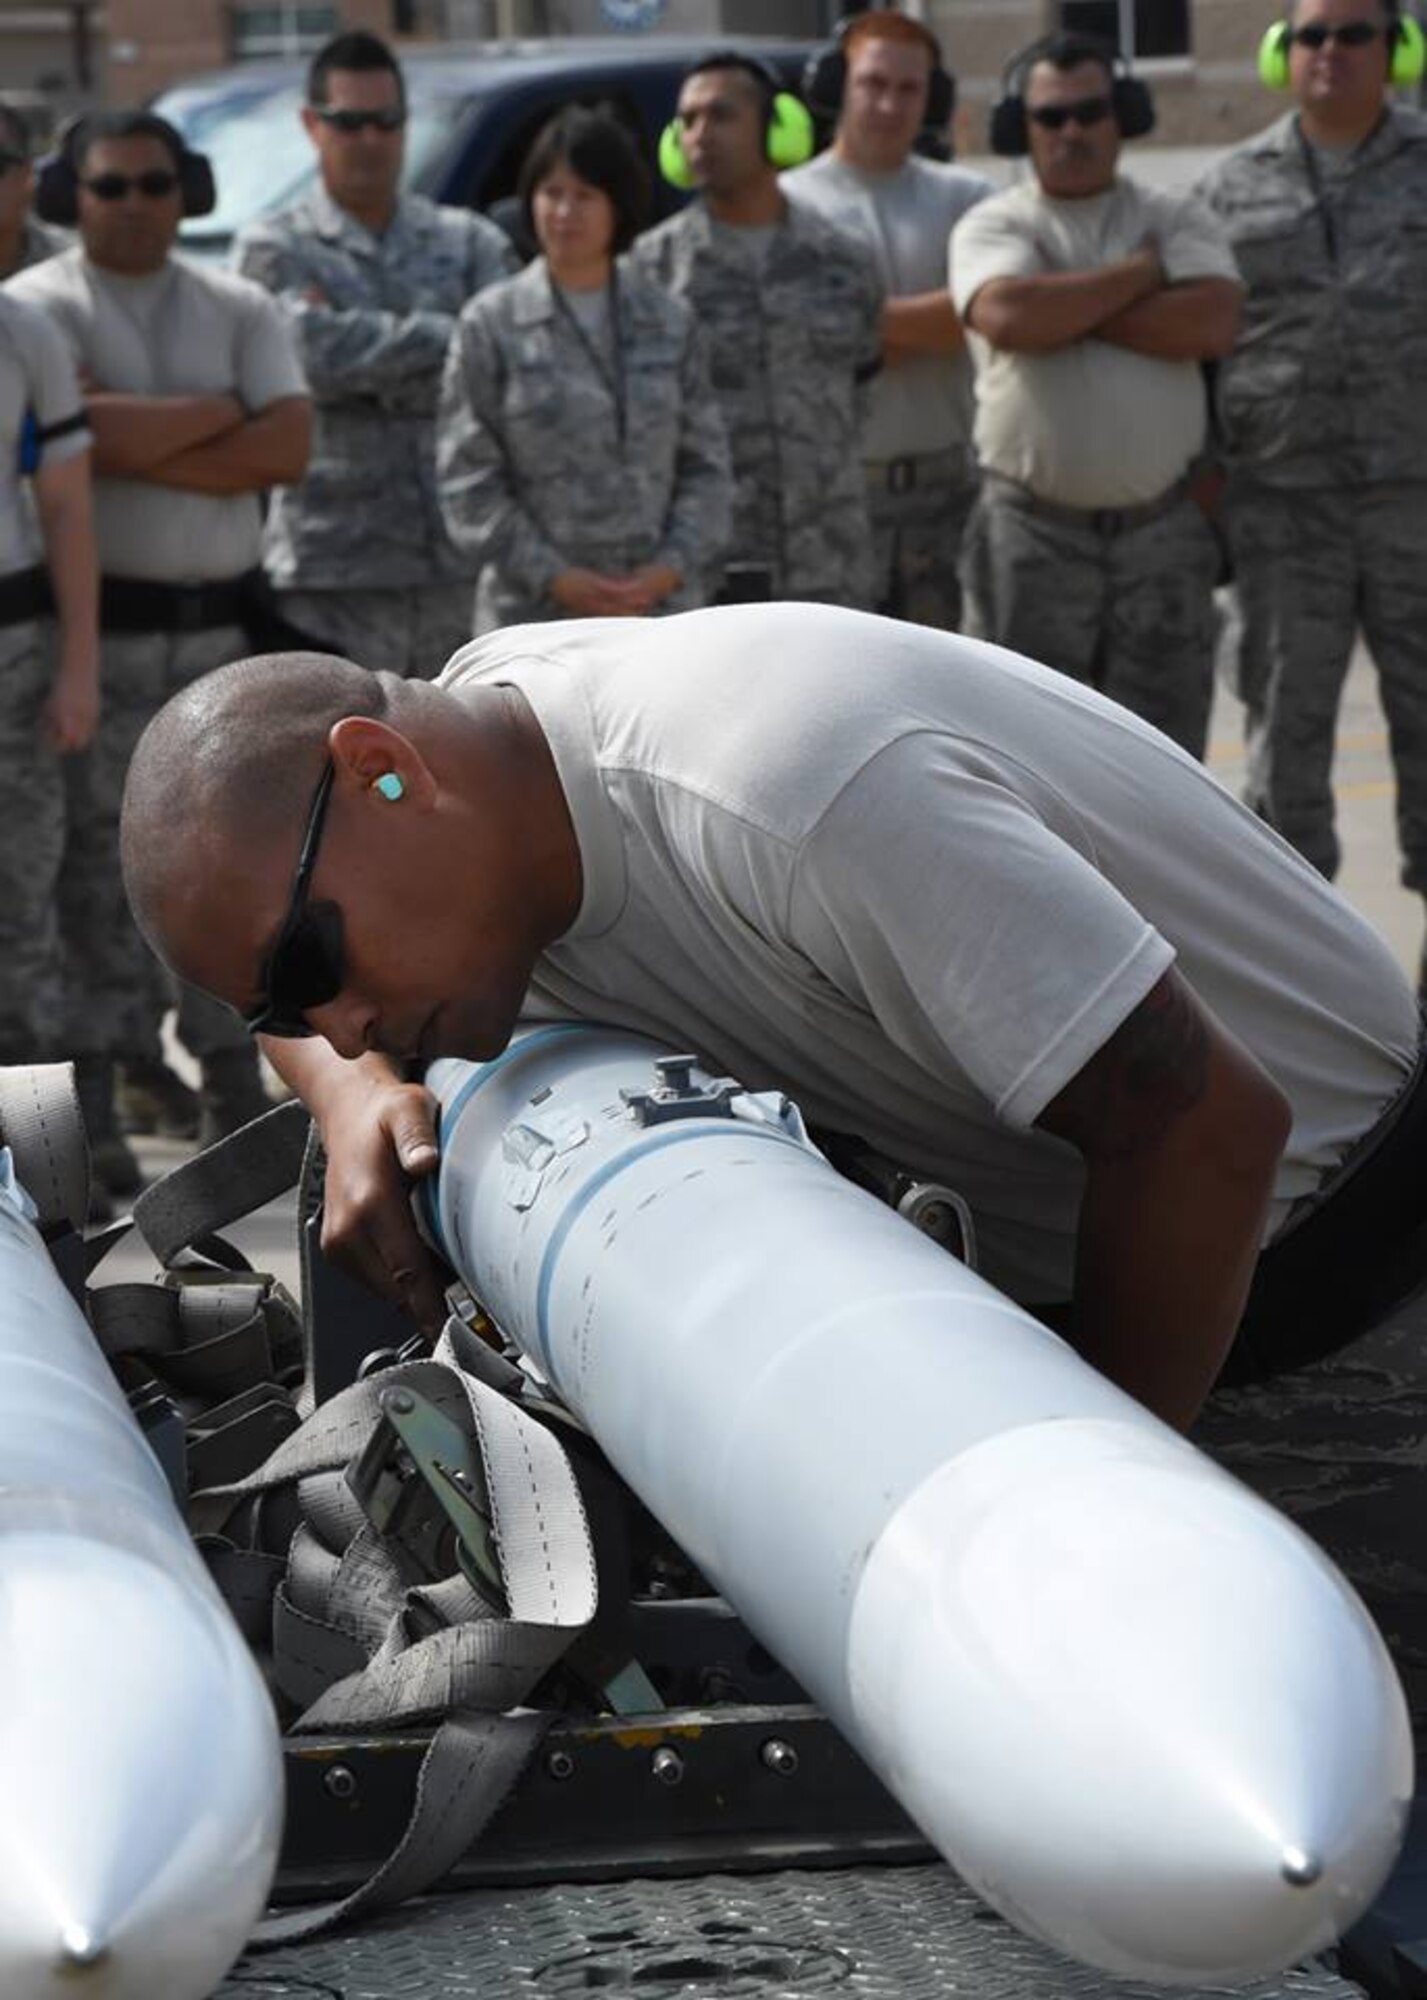 Tech. Sgt. Mark Nash, an aircraft armament systems technician, inspects an inert AIM-120, advanced medium-range air-to-air missile, as part of the loading portion of the 56th Fighter Wing’s quarterly load crew of the quarter competition at Luke Air Force Base, Arizona, April 8, 2016. Nash is a member of the Texas Air National Guard’s 149th Fighter Wing, headquartered at Joint Base San Antonio-Lackland, Texas, which is currently operating at Luke while San Antonio’s Kelly Field undergoes runway repairs. (U.S. Air National Guard photo by 2nd Lt. Phil Fountain)